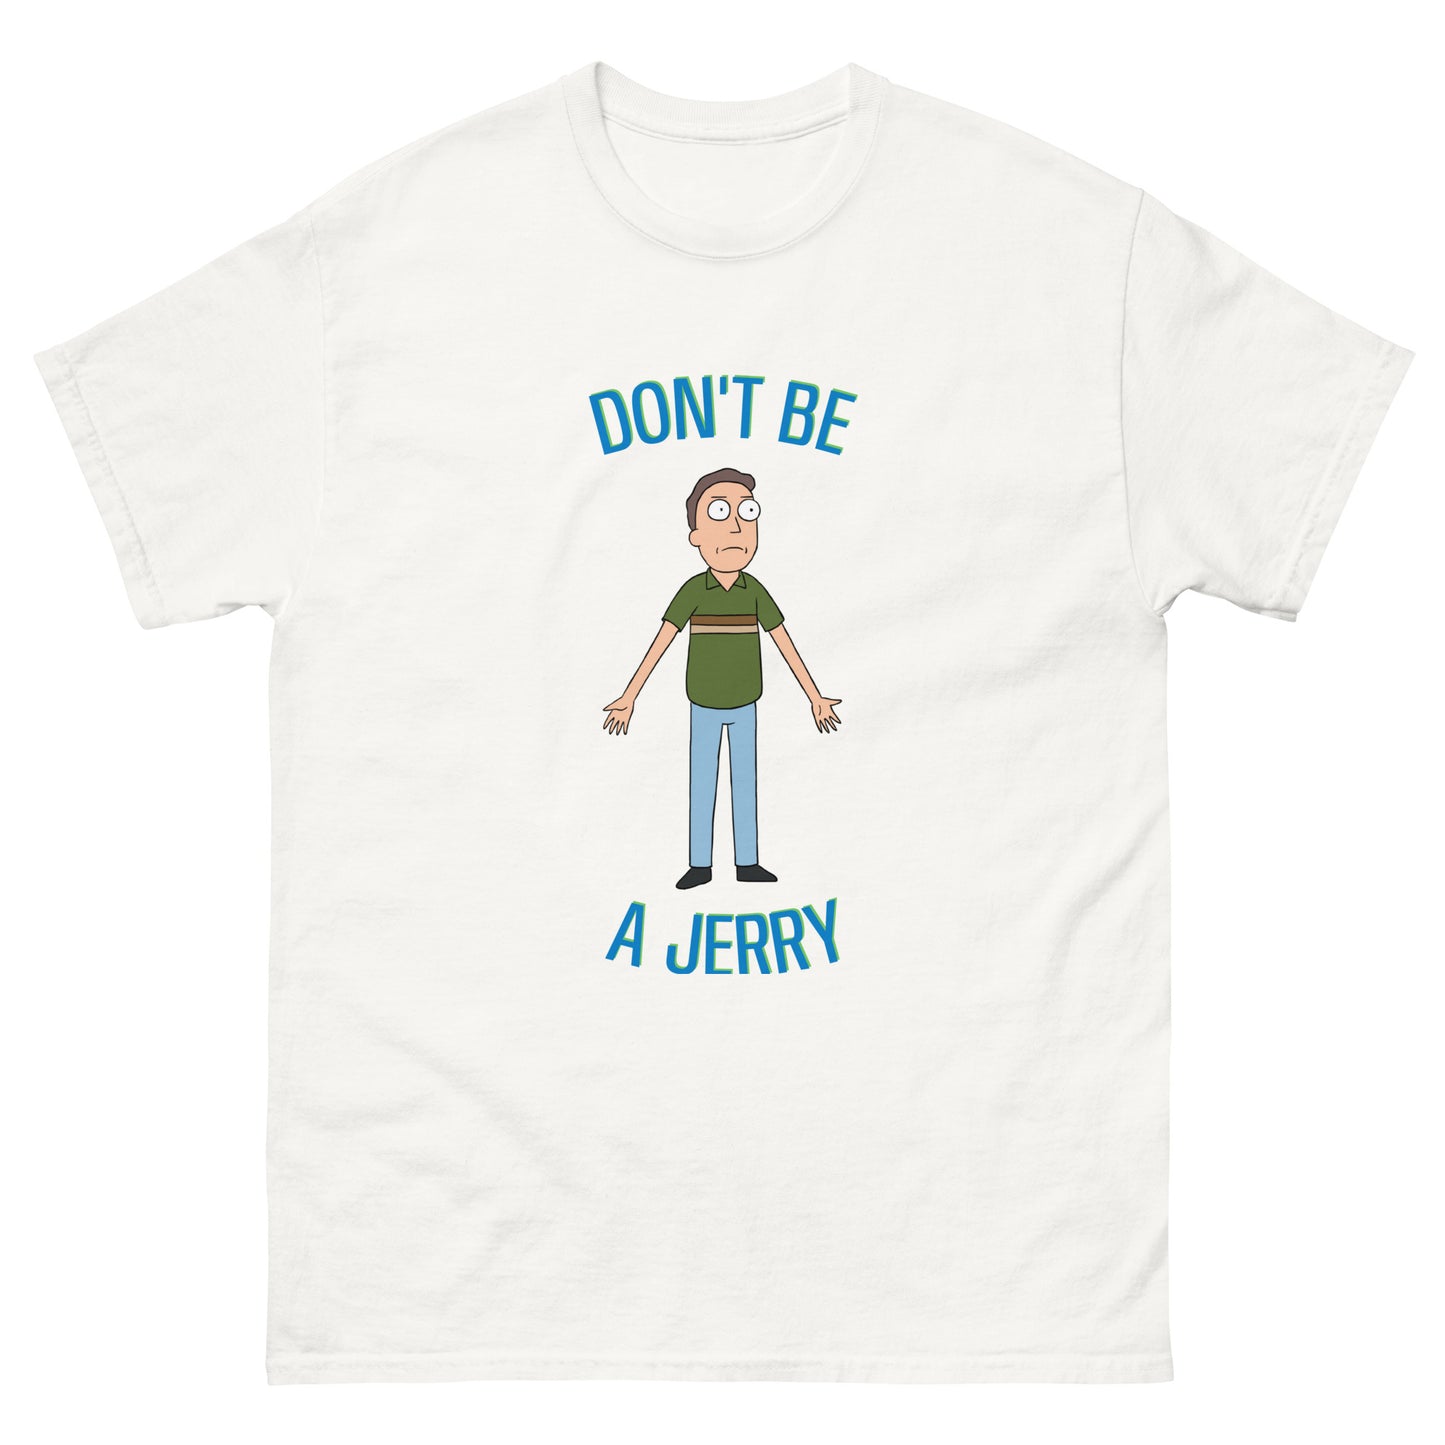 Don't Be a Jerry T-Shirt